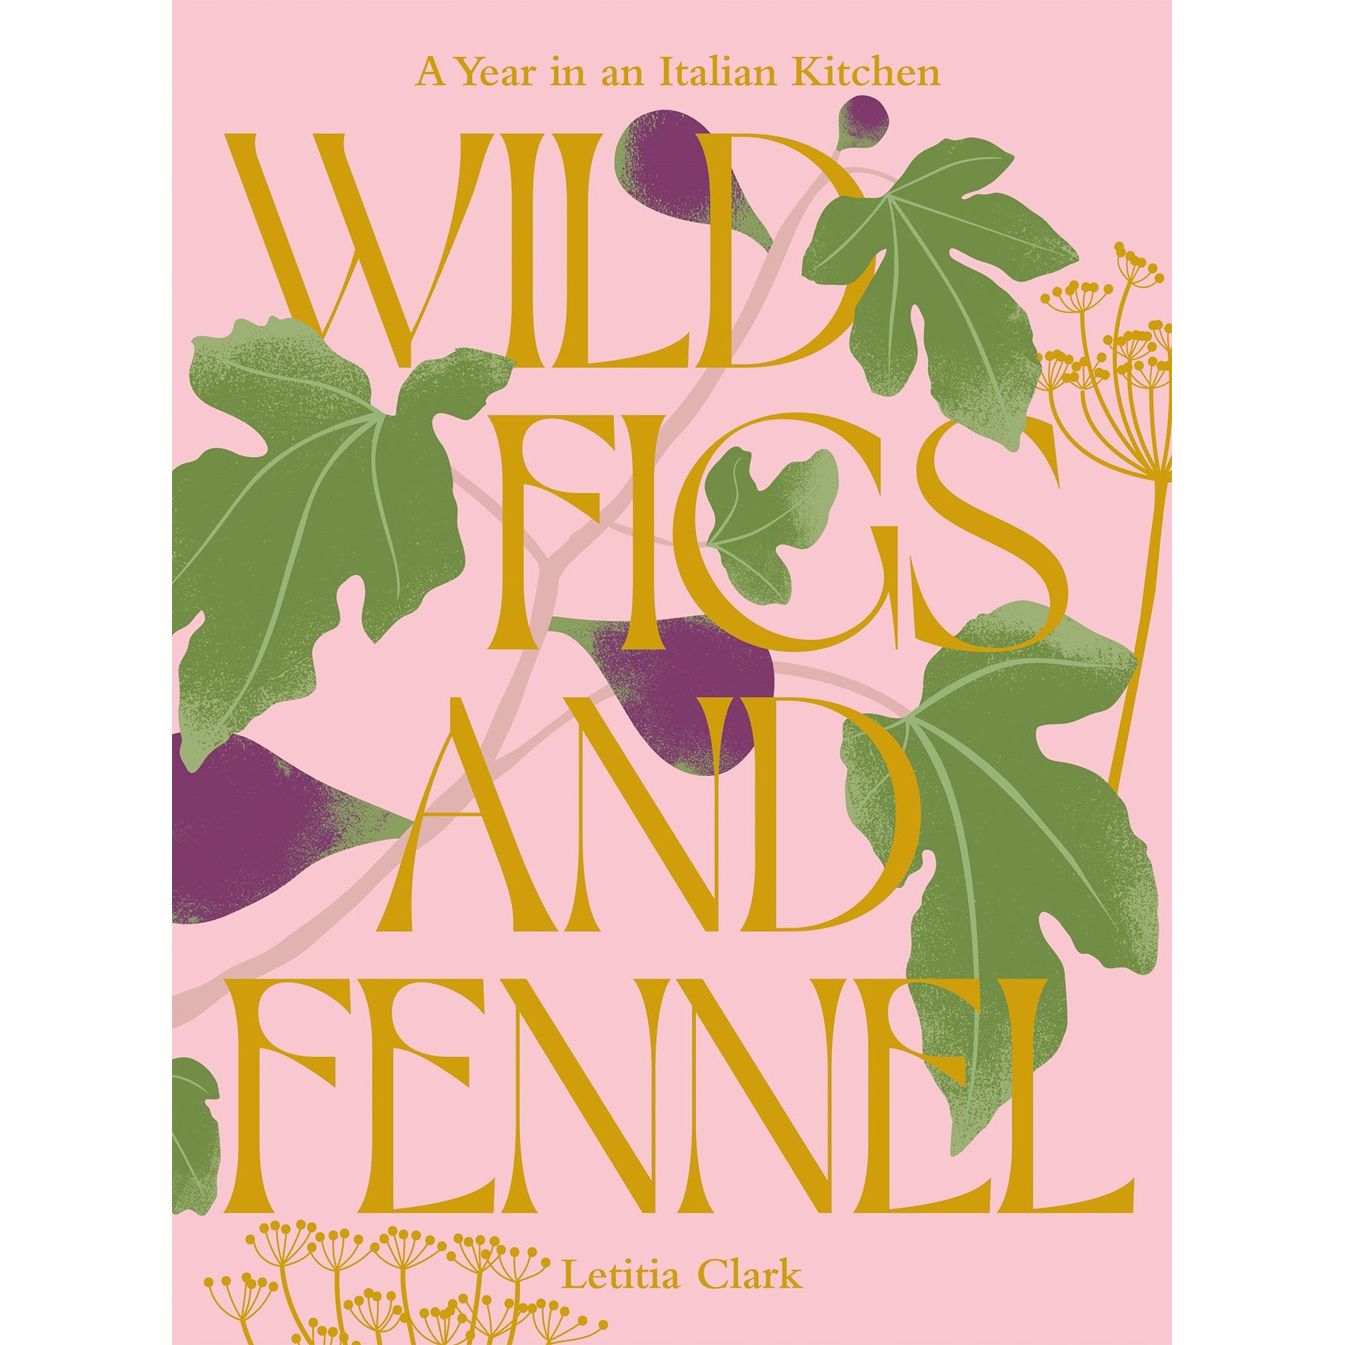 PREORDER: Wild Figs and Fennel (Letitia Clark)